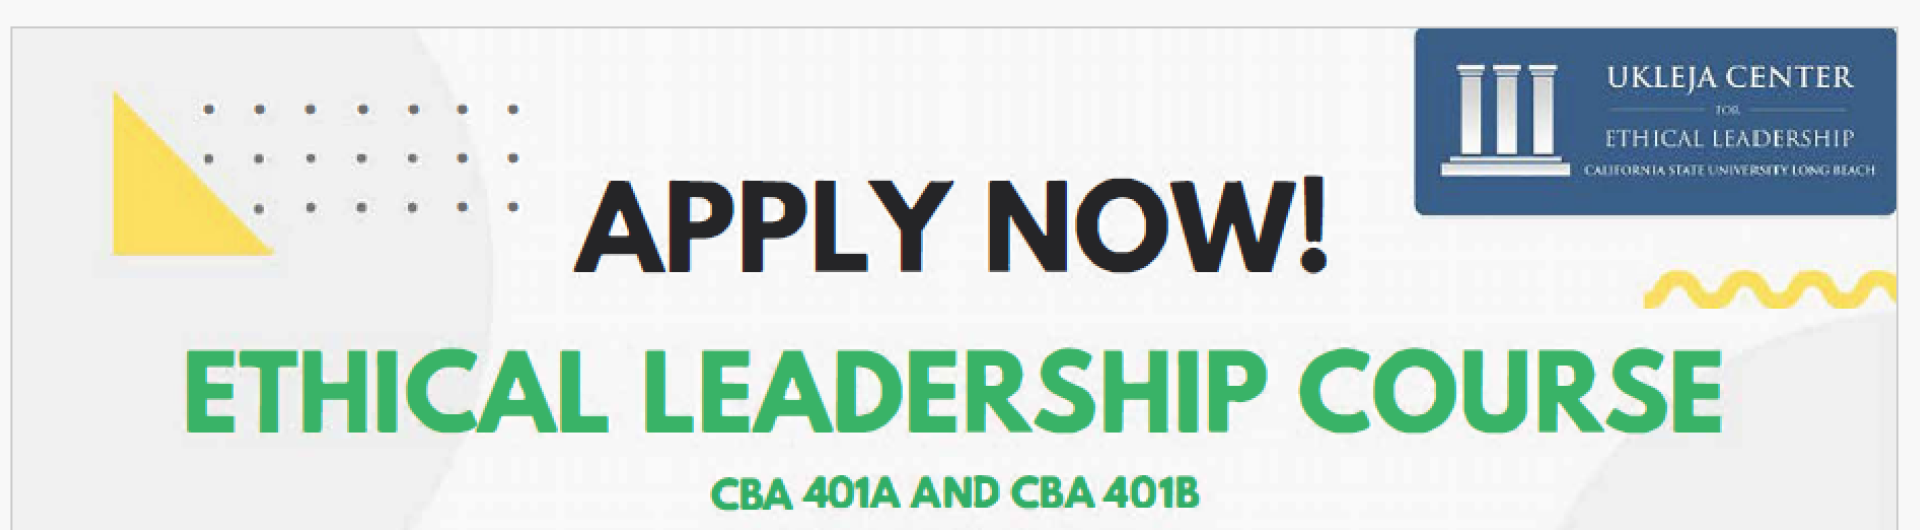 APPLY NOW ETHICAL LEADERSHIP COURSE CBA 401A AND CBA 401B